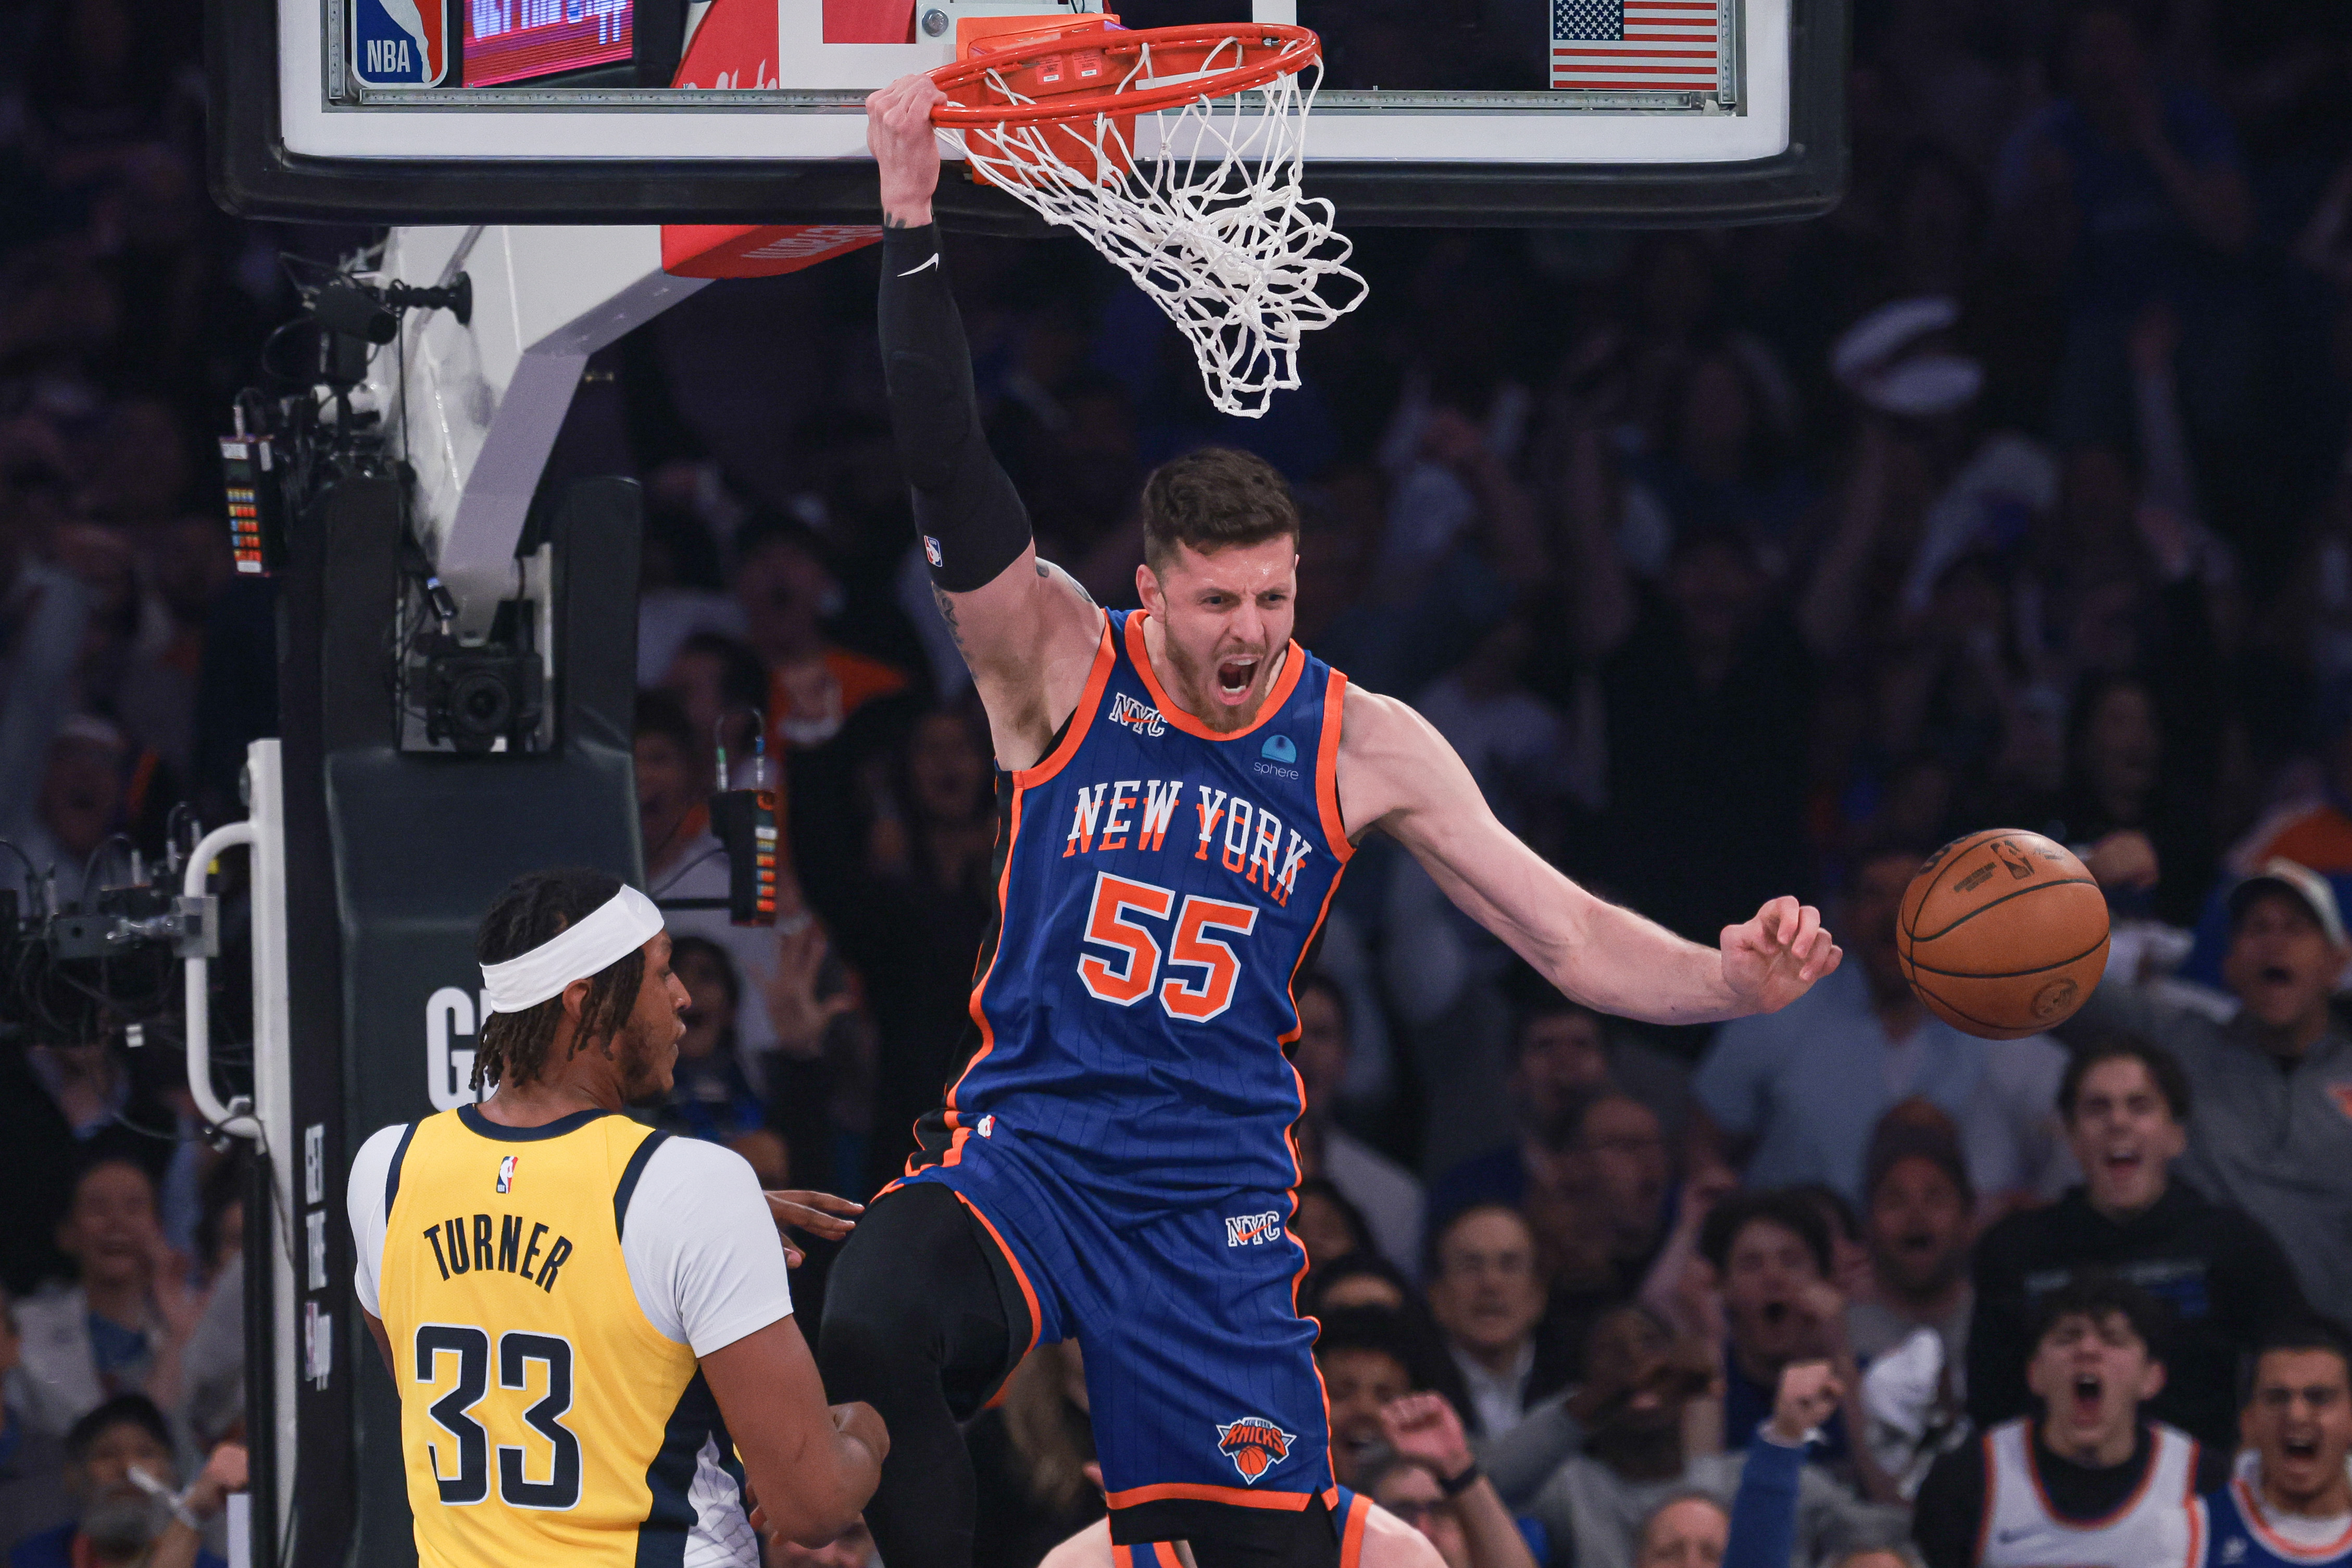 How the Knicks’ supporting cast fueled a thrilling, series-tilting win